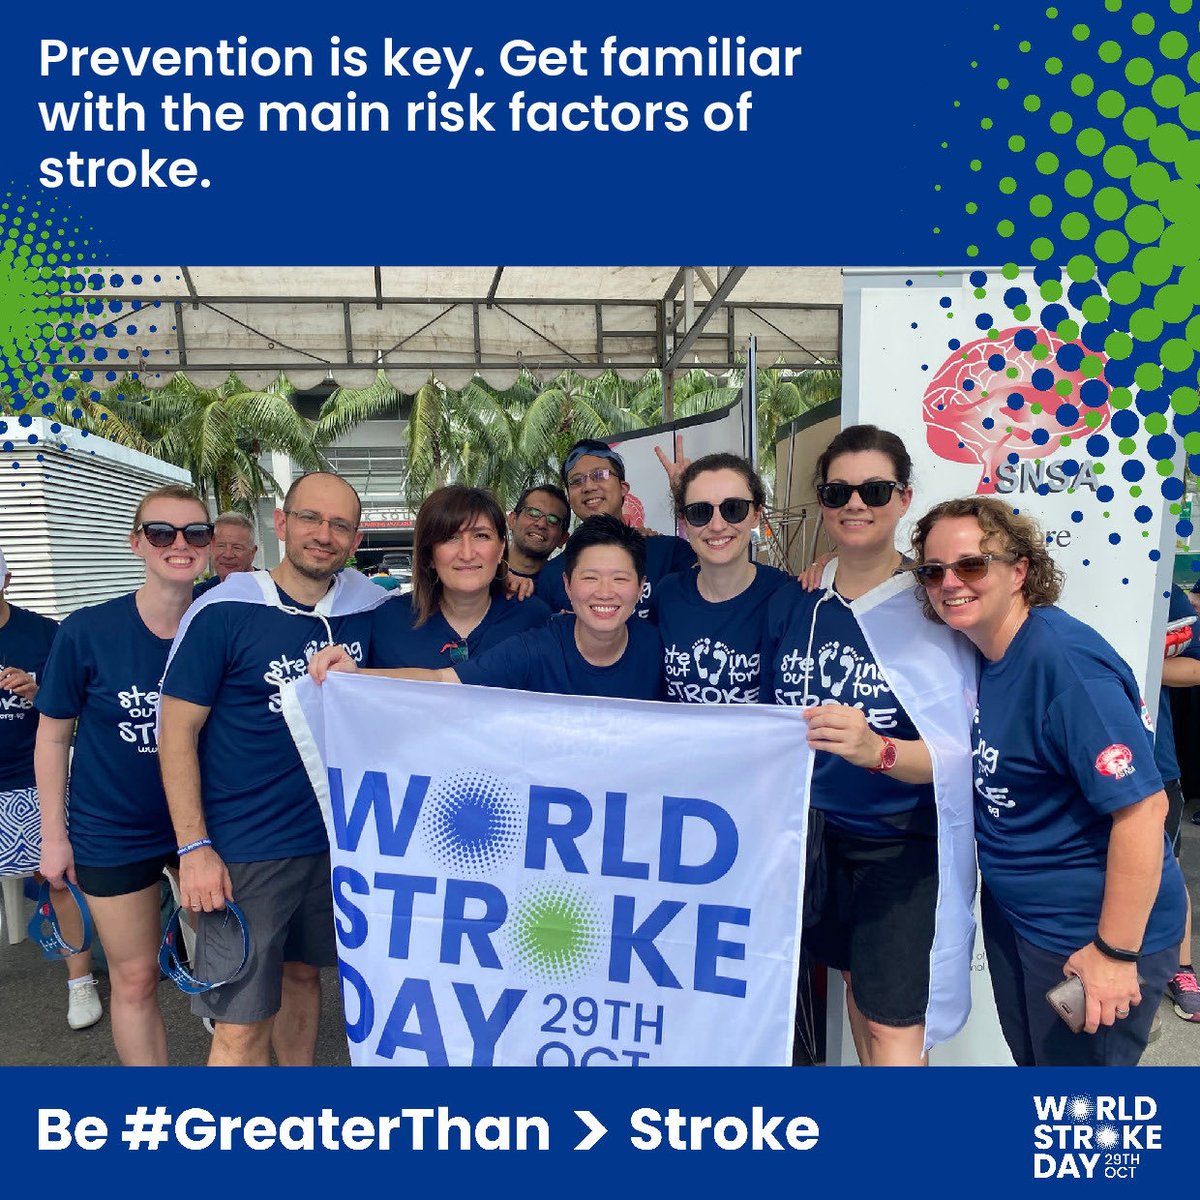 Today is the #worldstrokeday 90% of the stroke risk factors are modifiable. Go outside and stay active. #greaterthan ⁦@MarinaCharala⁩ ⁦@KhimKwah⁩ ⁦@DrAsyraf⁩ ⁦@BelsonSarah⁩ ⁦@Ahmednasr_Neuro⁩